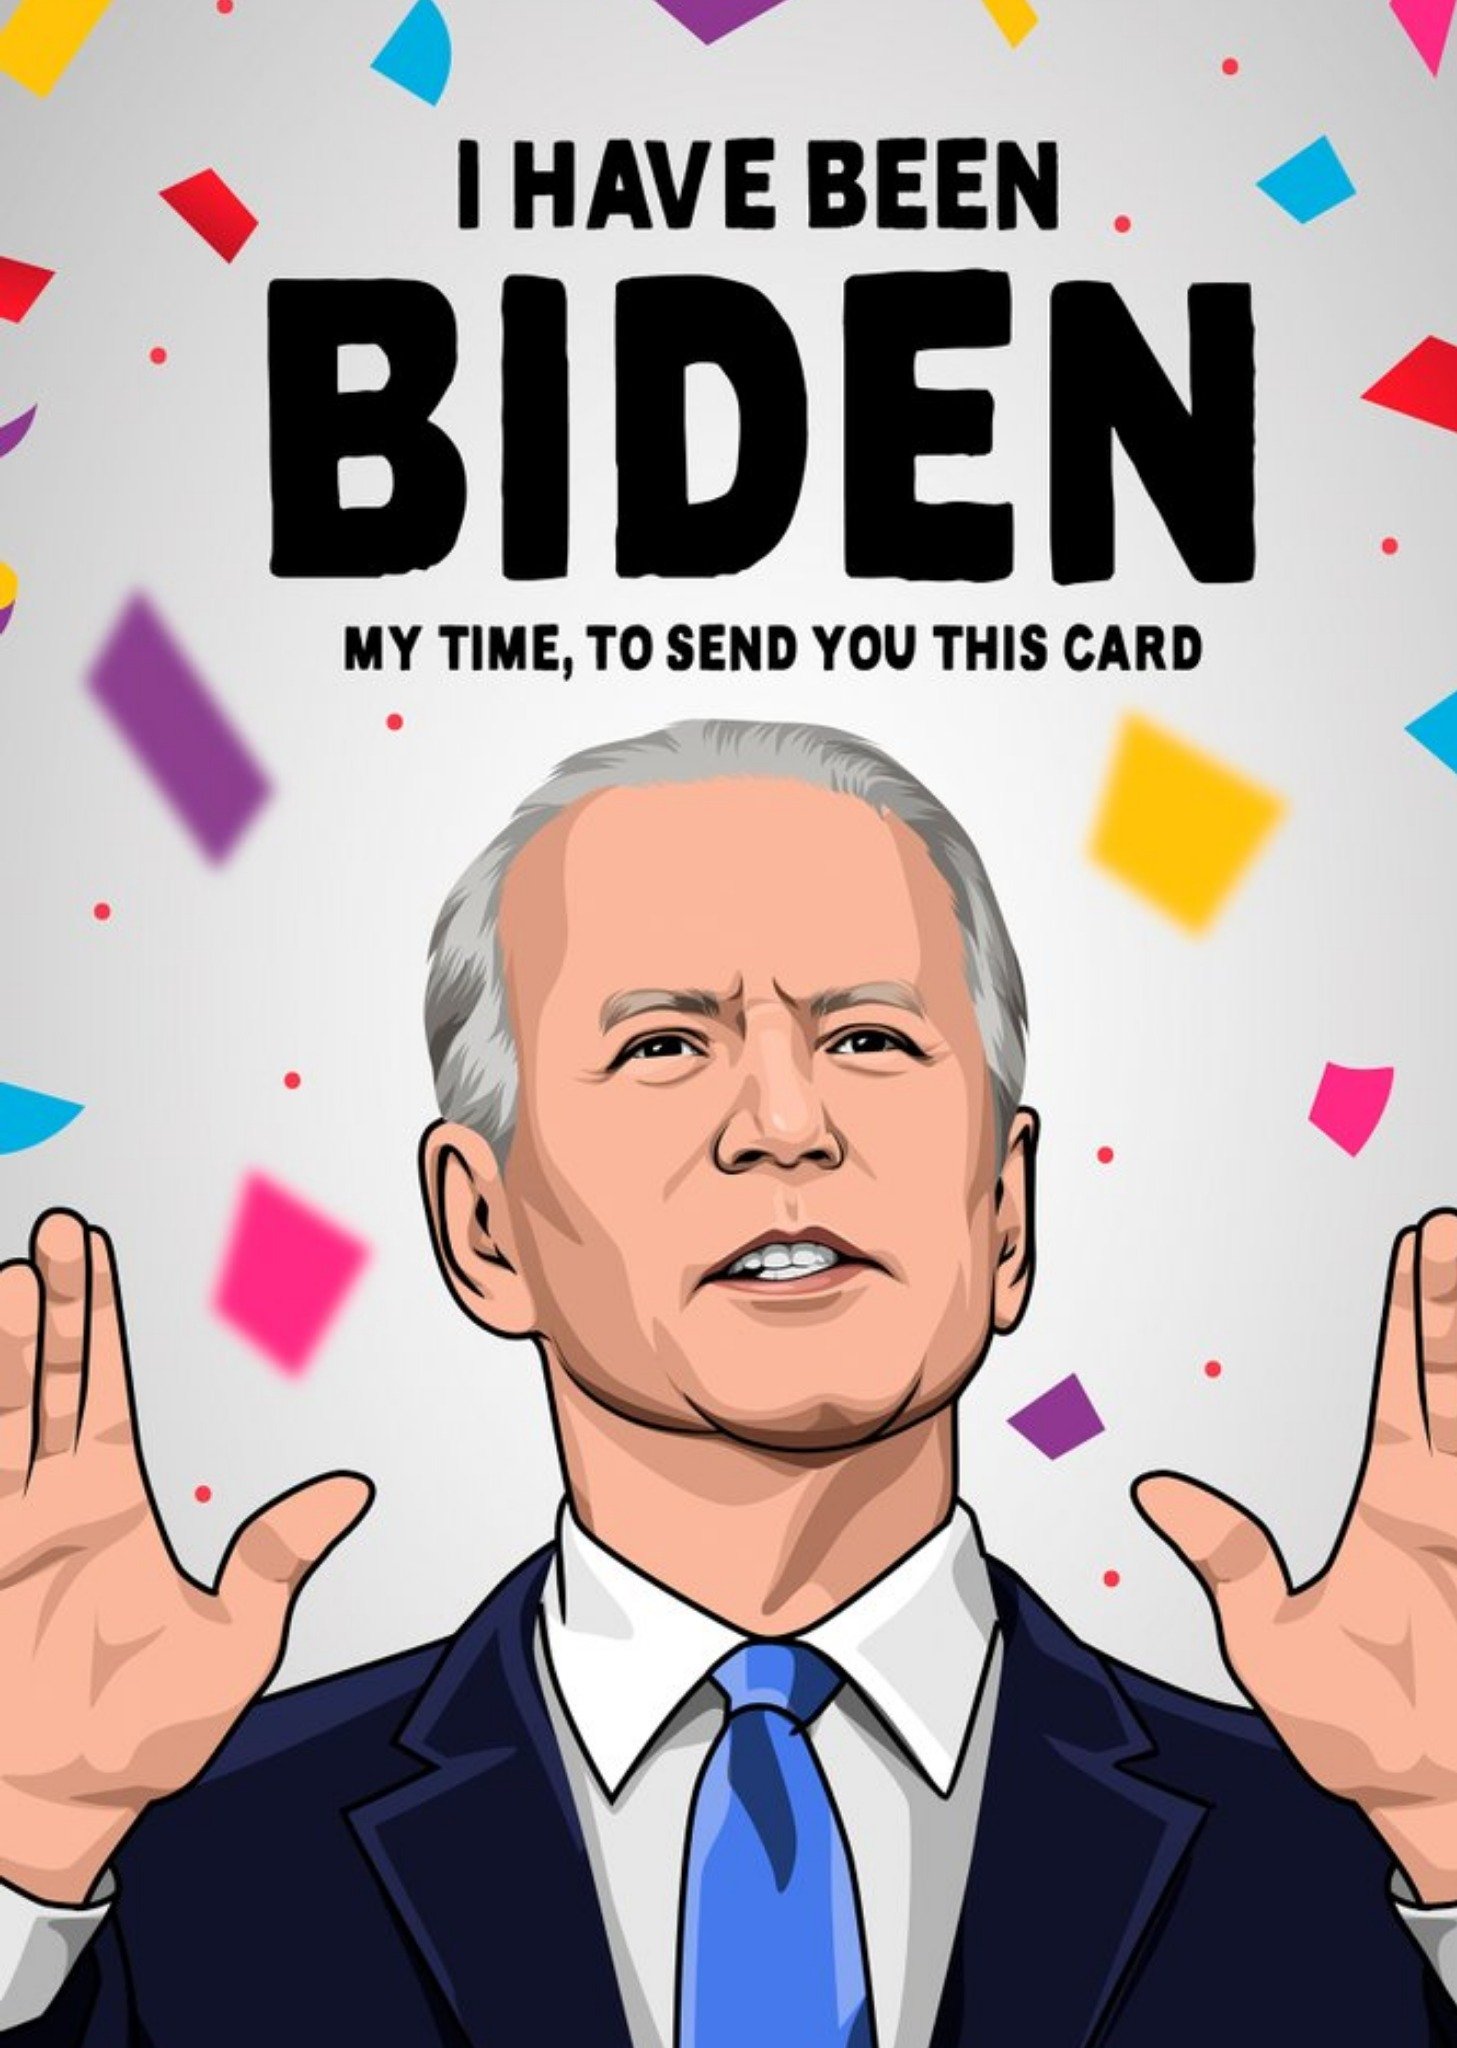 All Things Banter Funny Spoof I Have Been Biden My Time To Send You This Card, Large